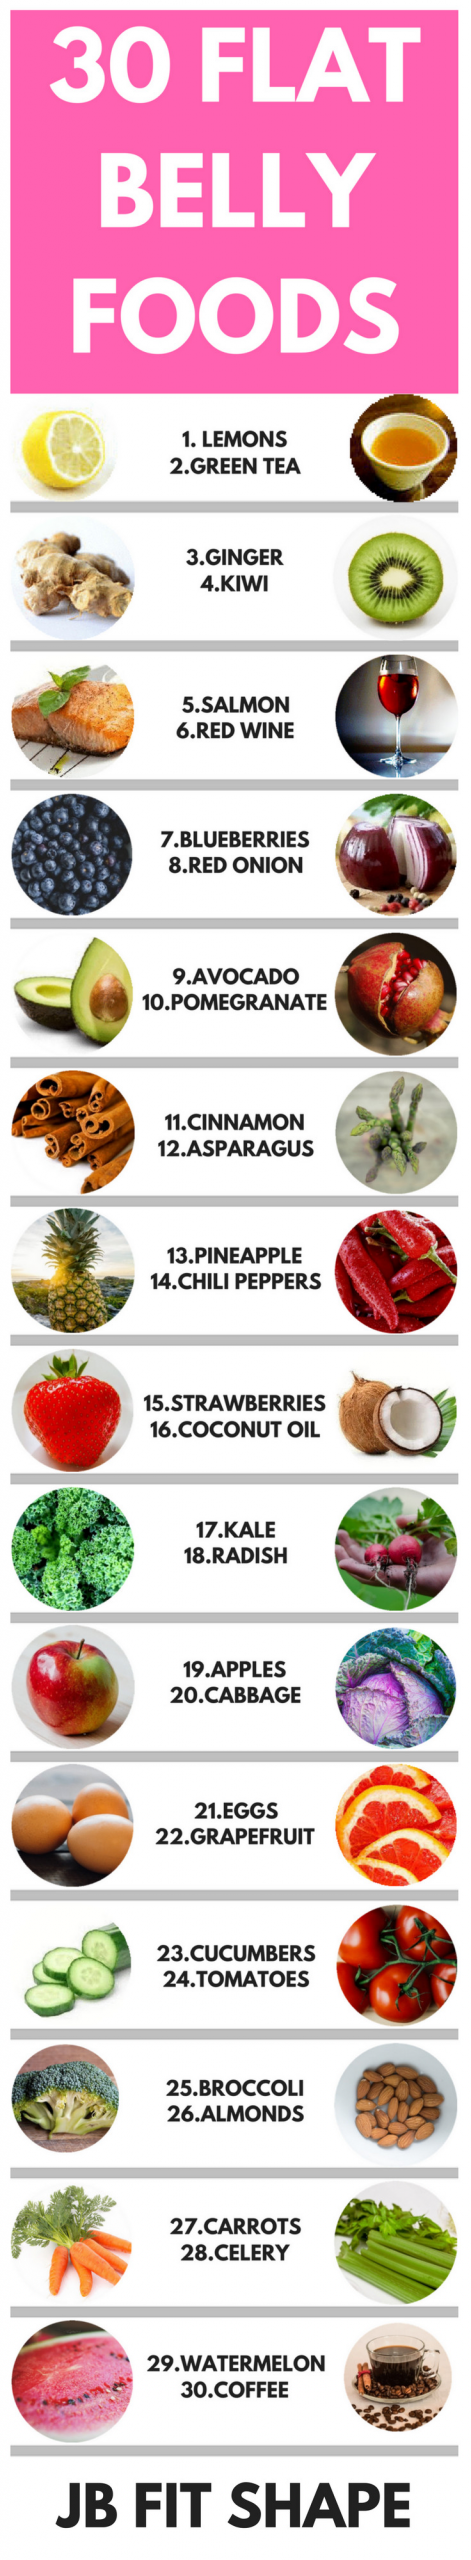 Fat Burning Foods Losing Weight Flat Belly
 Pin on losing weight tips